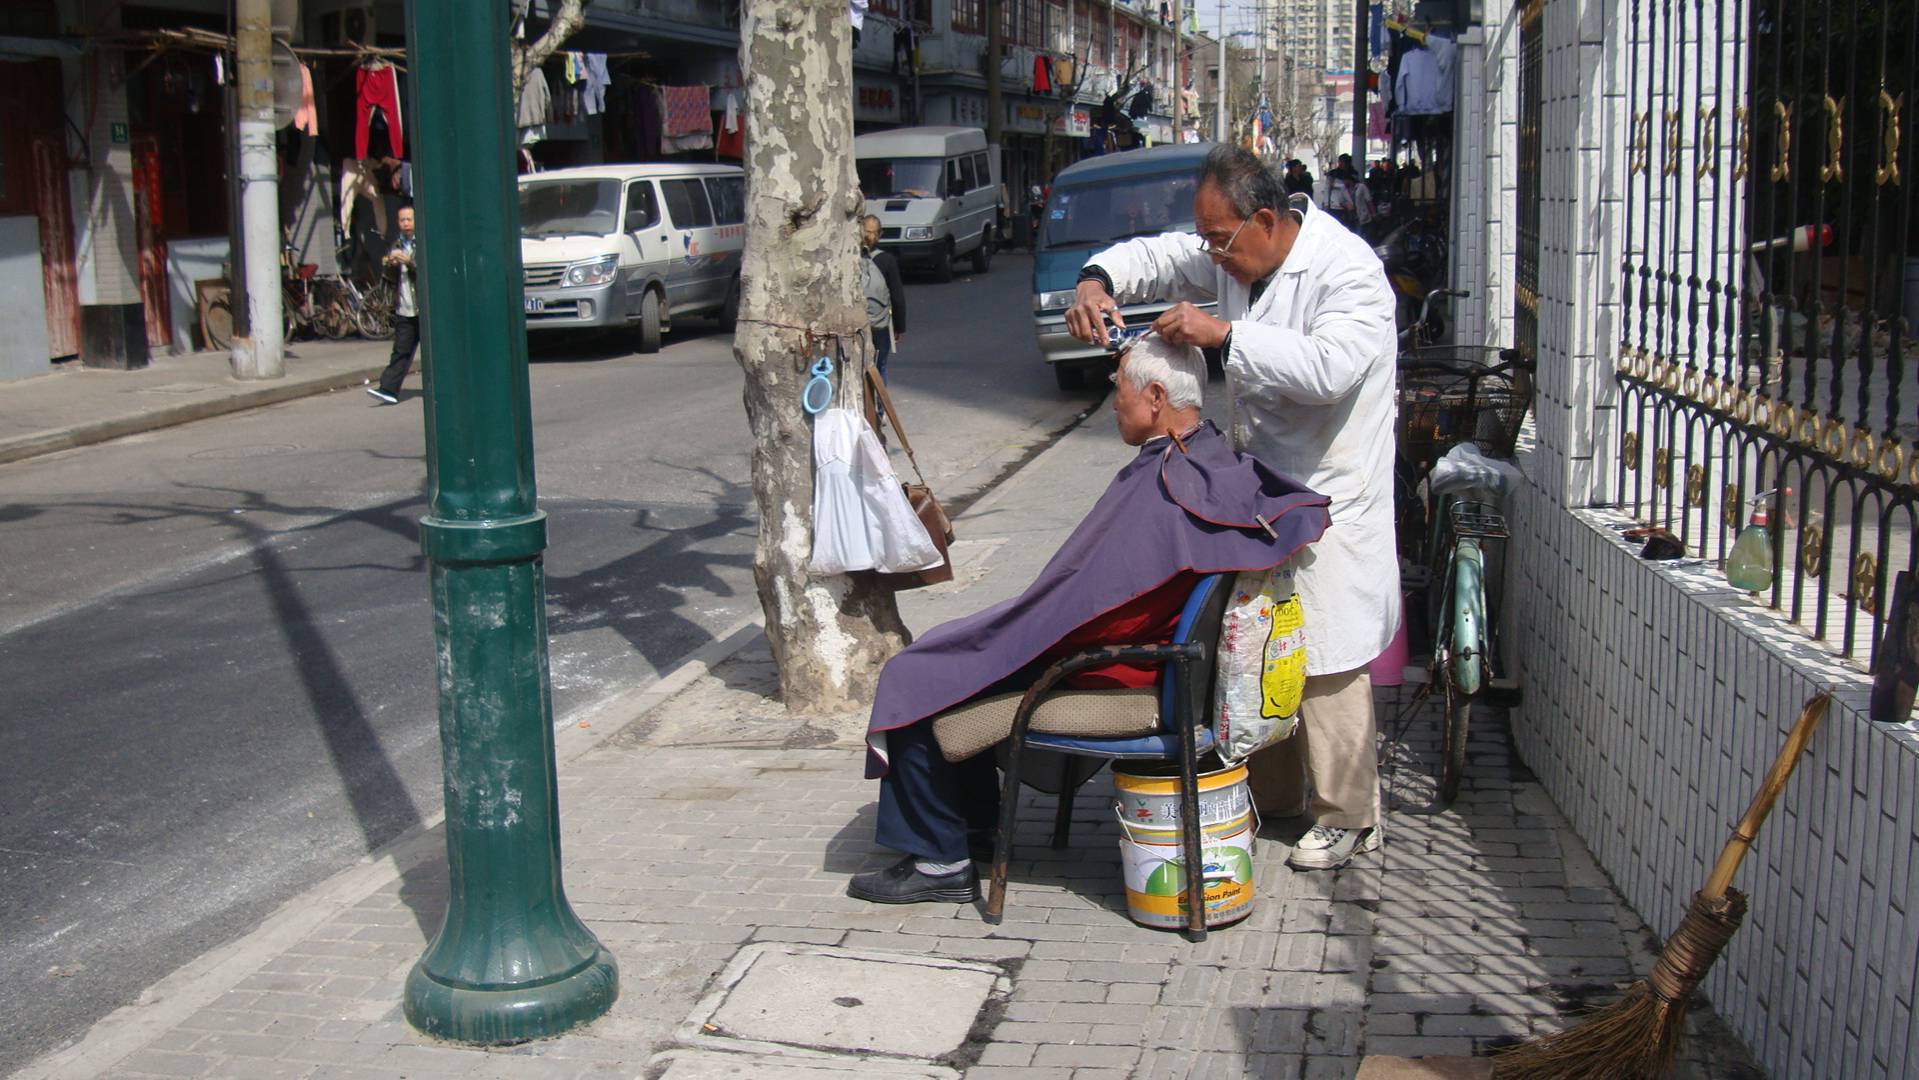 Shanghai barber at work on the street.  Shanghai, China.  The very definition of low overhead.